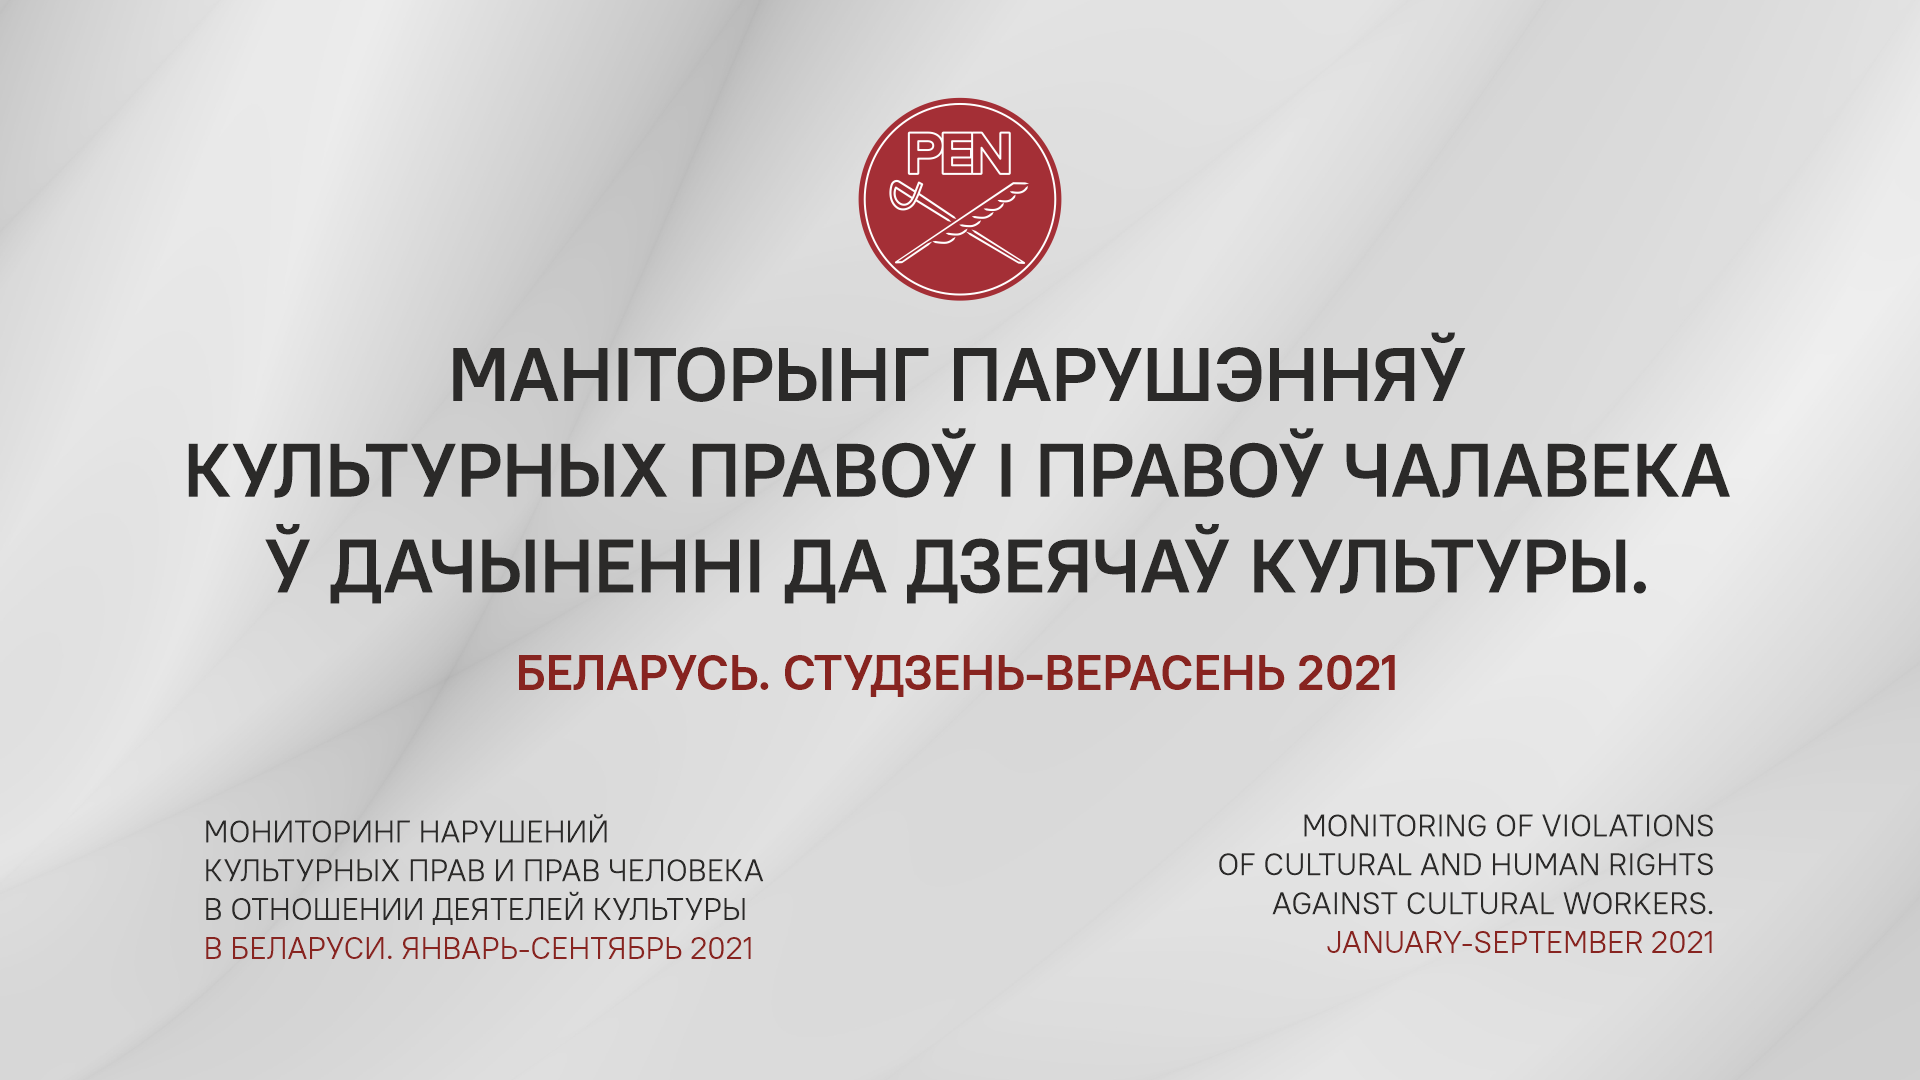 MONITORING OF VIOLATIONS OF CULTURAL AND HUMAN RIGHTS AGAINST CULTURAL WORKERS. JANUARY-SEPTEMBER 2021